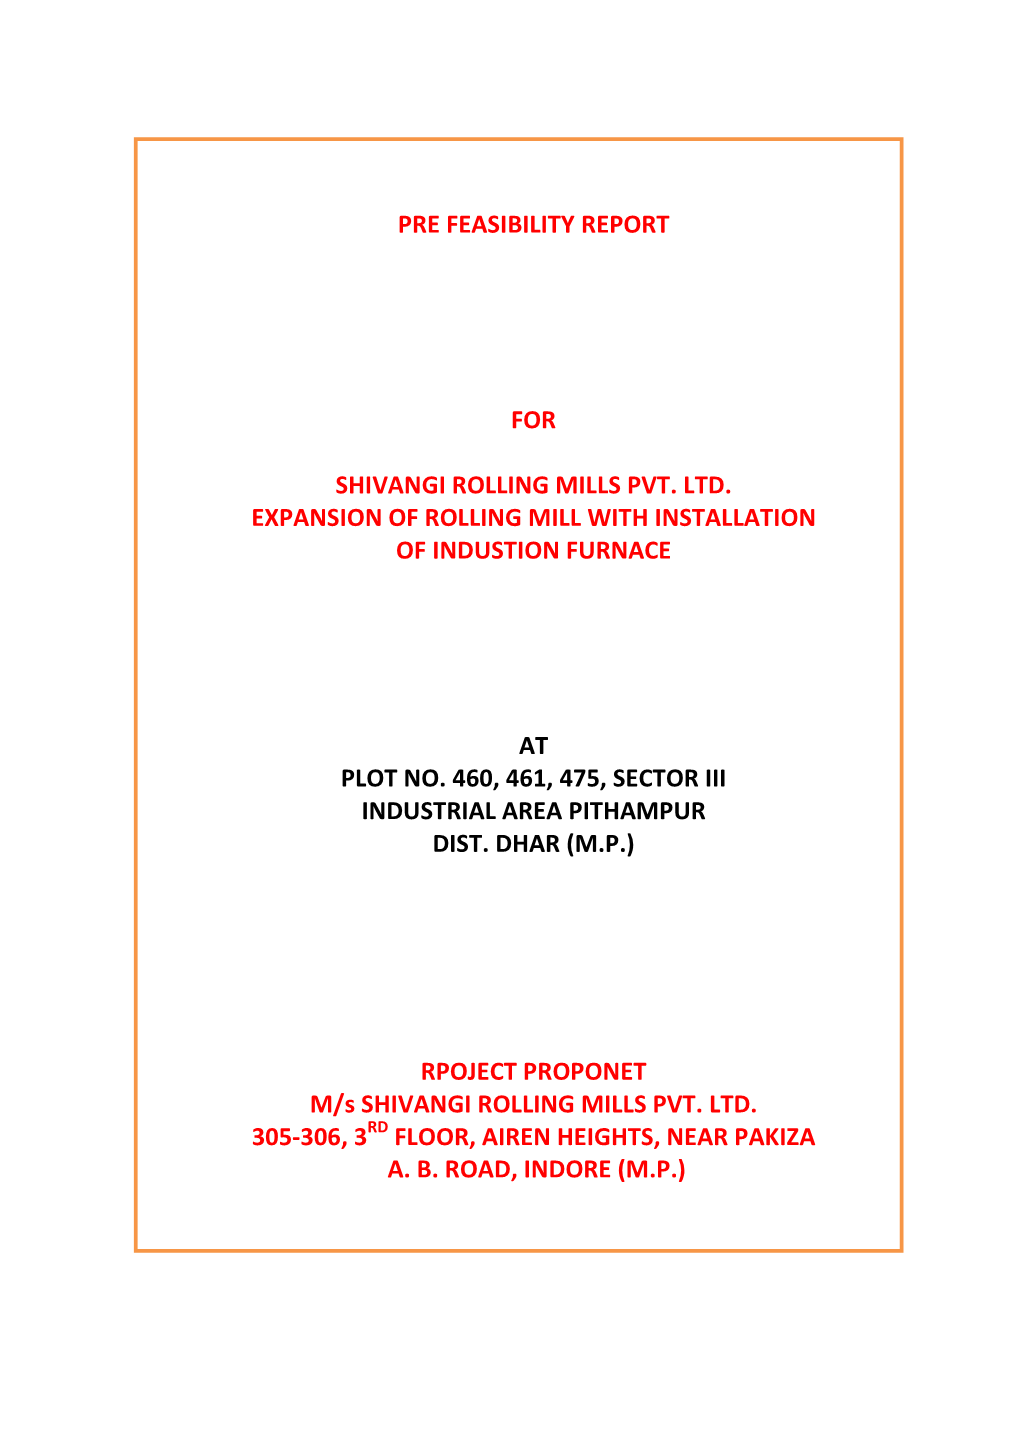 Pre Feasibility Report for Shivangi Rolling Mills Pvt. Ltd. Expansion Of